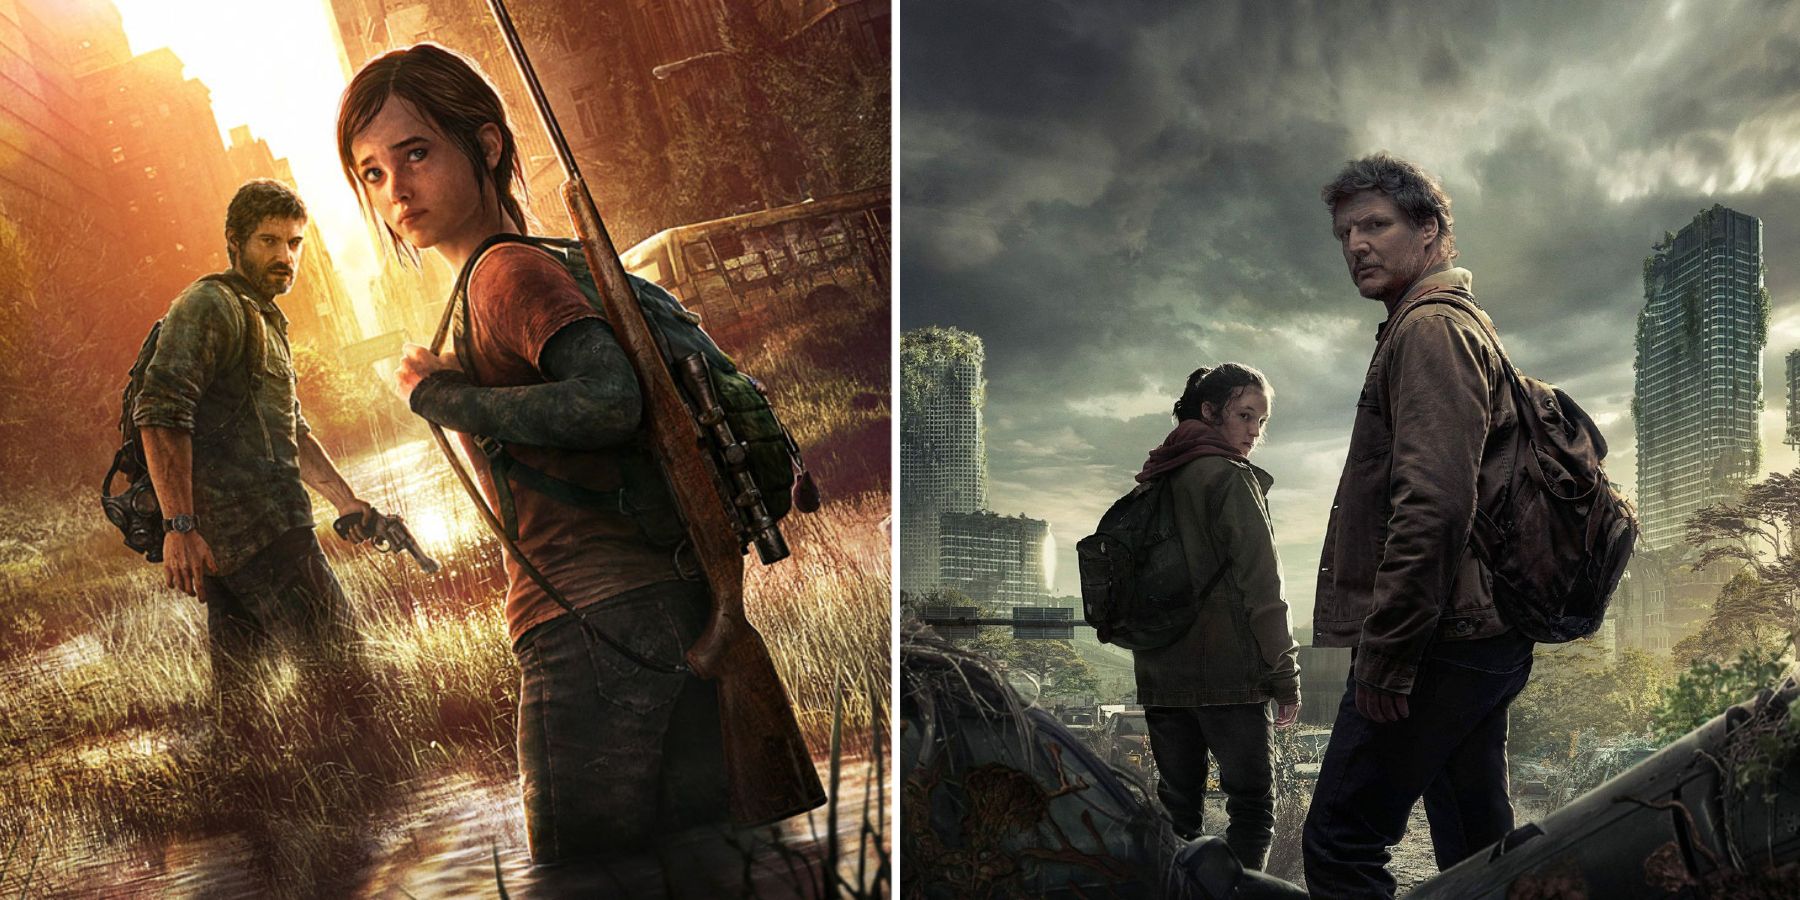 Joel and Ellie on the PS3 cover art for The Last of Us and Ellie (Bella Ramsey) and Joel (Pedro Pascal) on the poster for HBO's The Last of Us